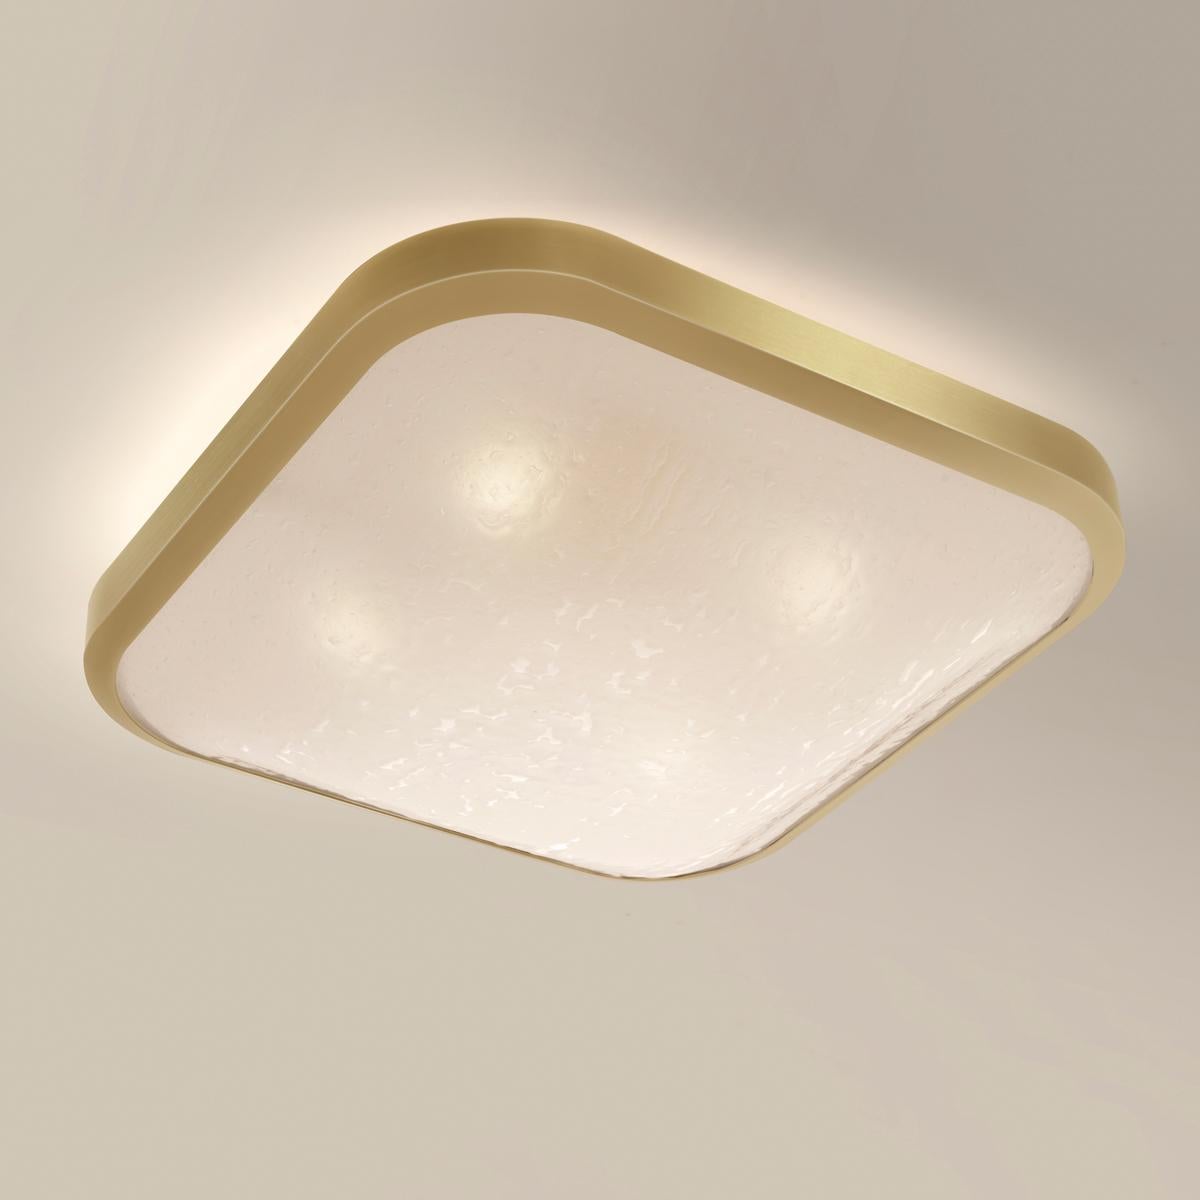 Modern Uno Square Ceiling Light by Gaspare Asaro-Satin Brass Finish For Sale